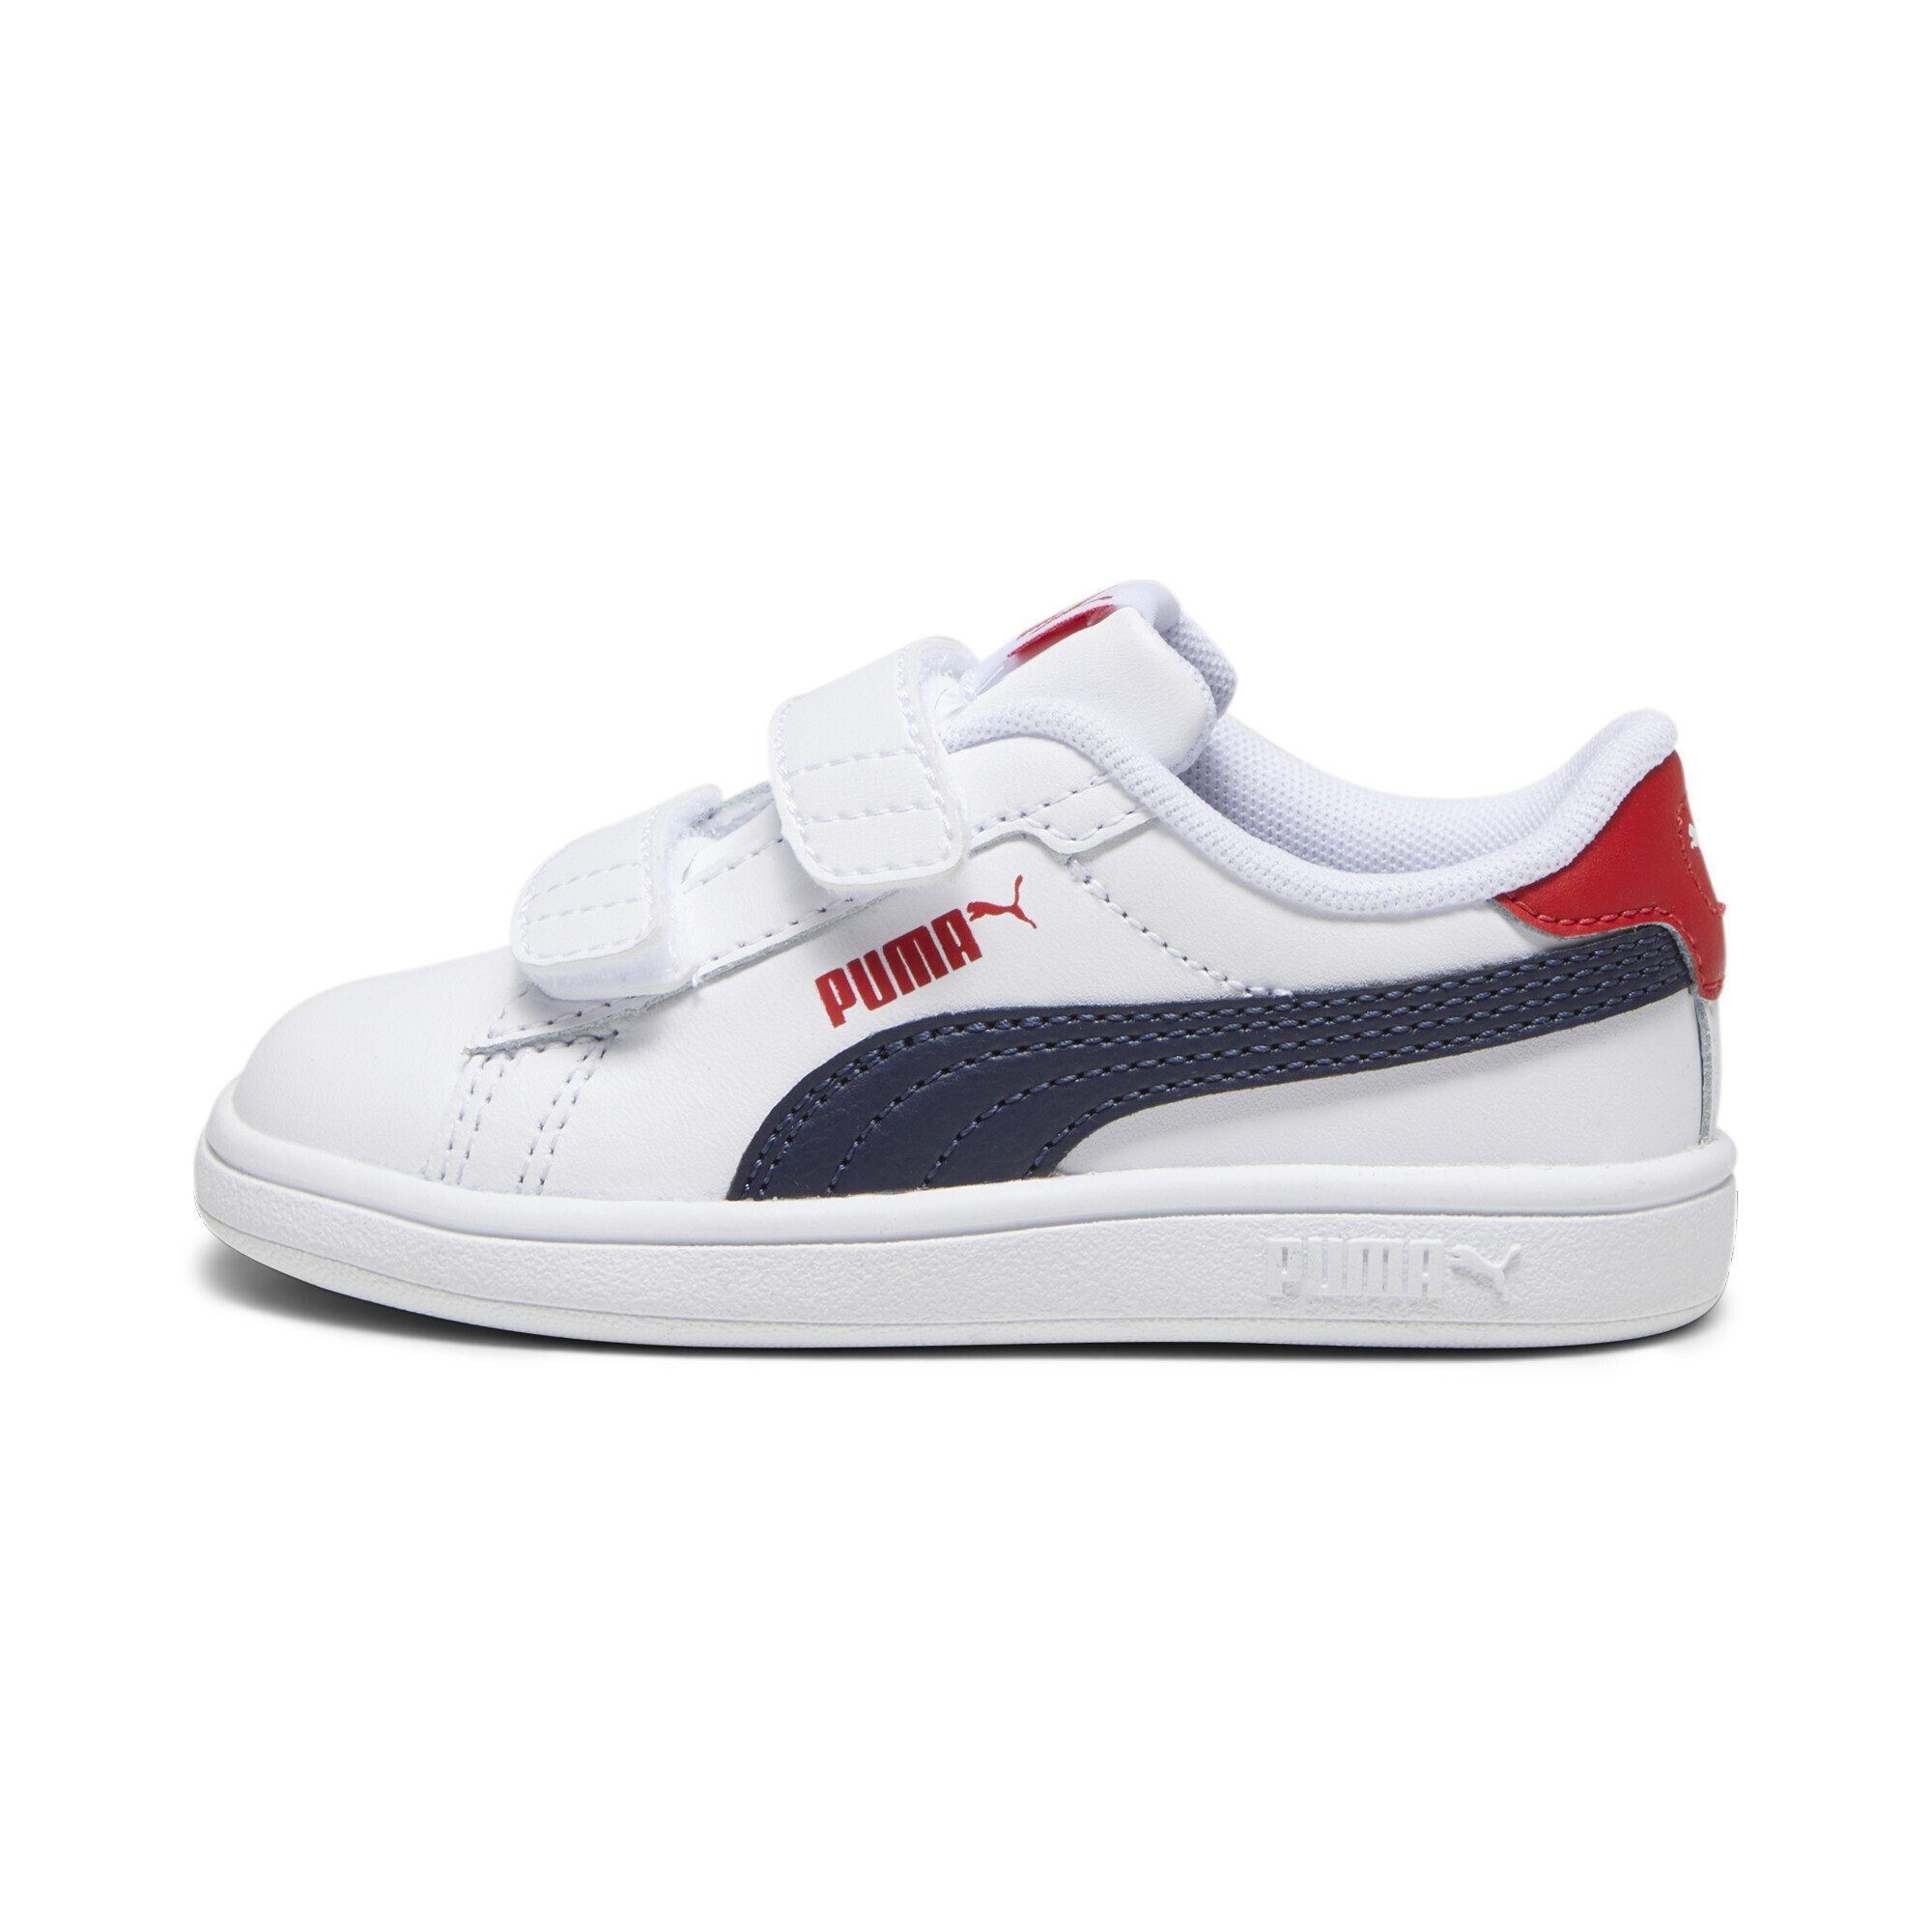 PUMA Smash 3.0 For Leather Blue Sneakers Kinder Navy Red Time All Sneaker V White